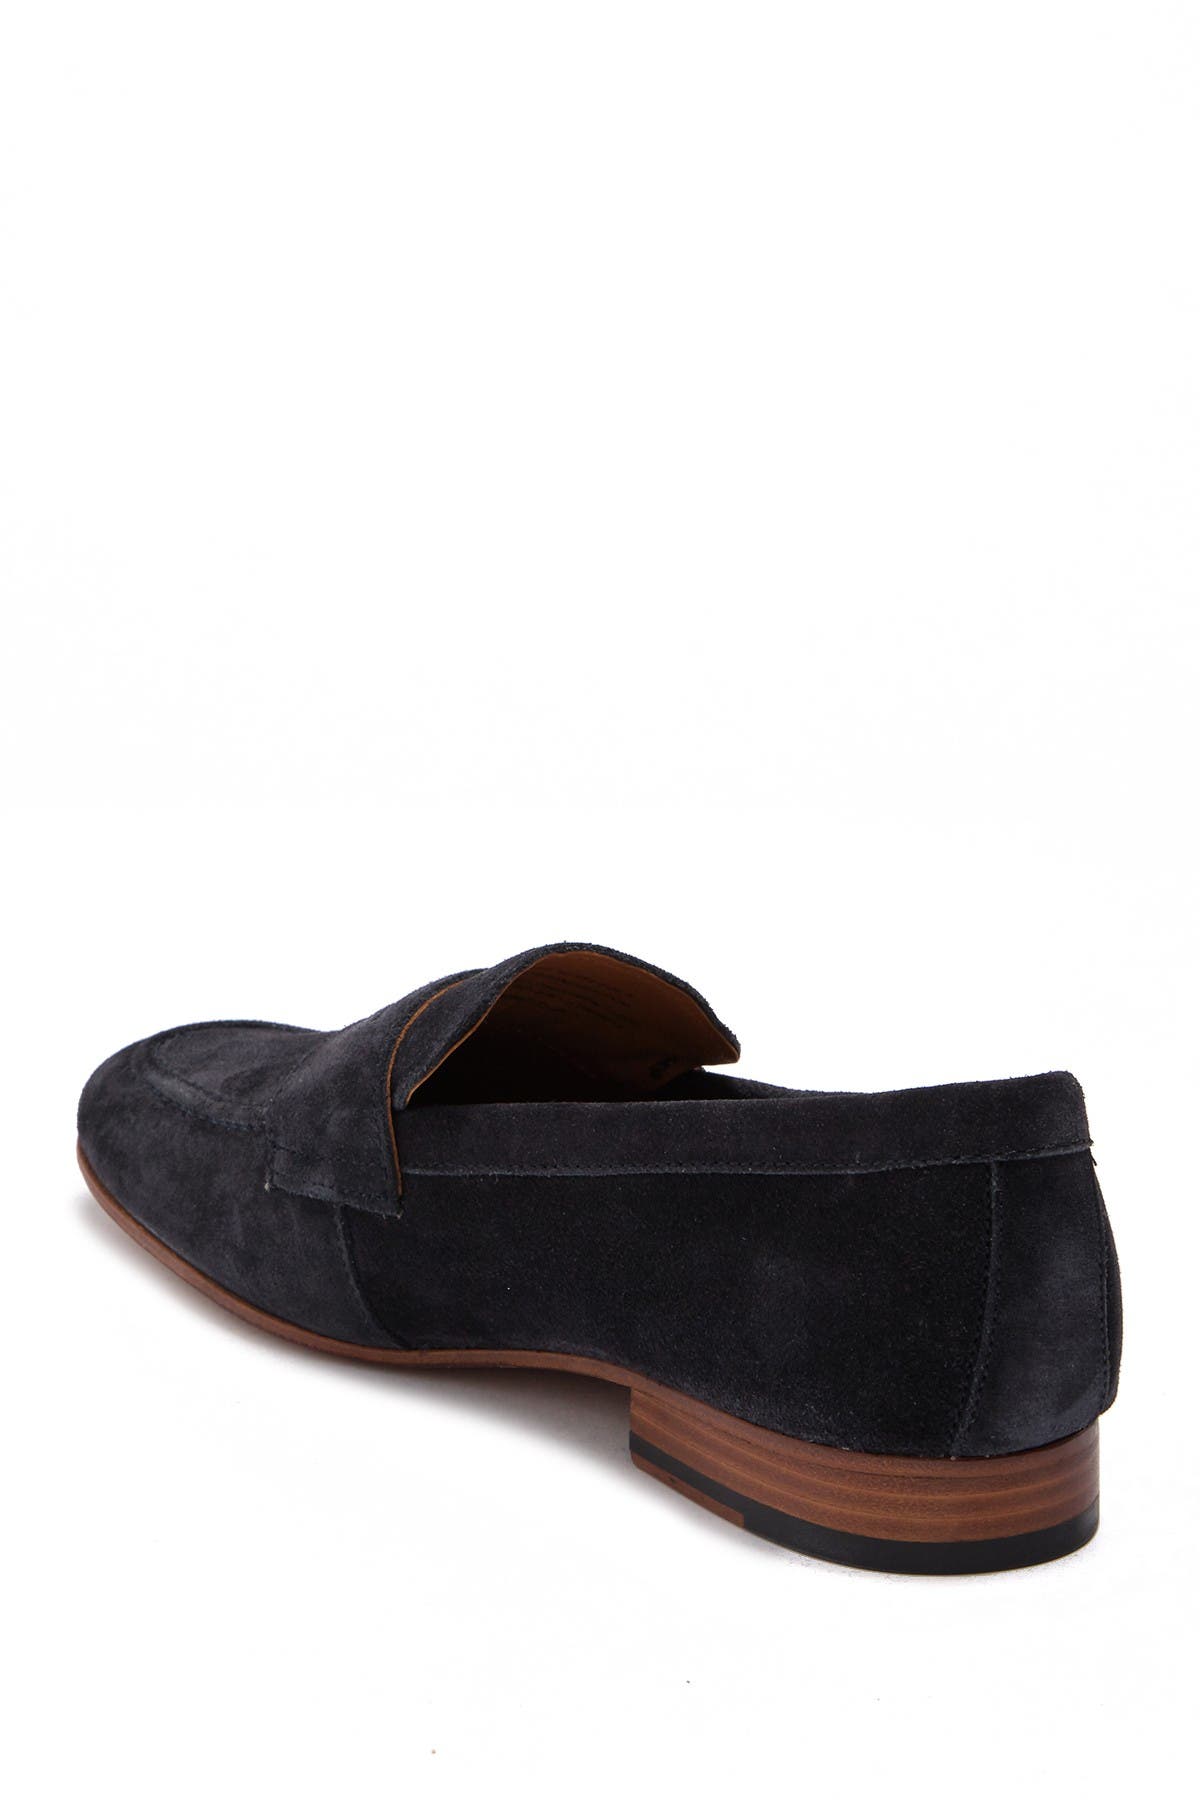 gordon rush wilfred penny loafer